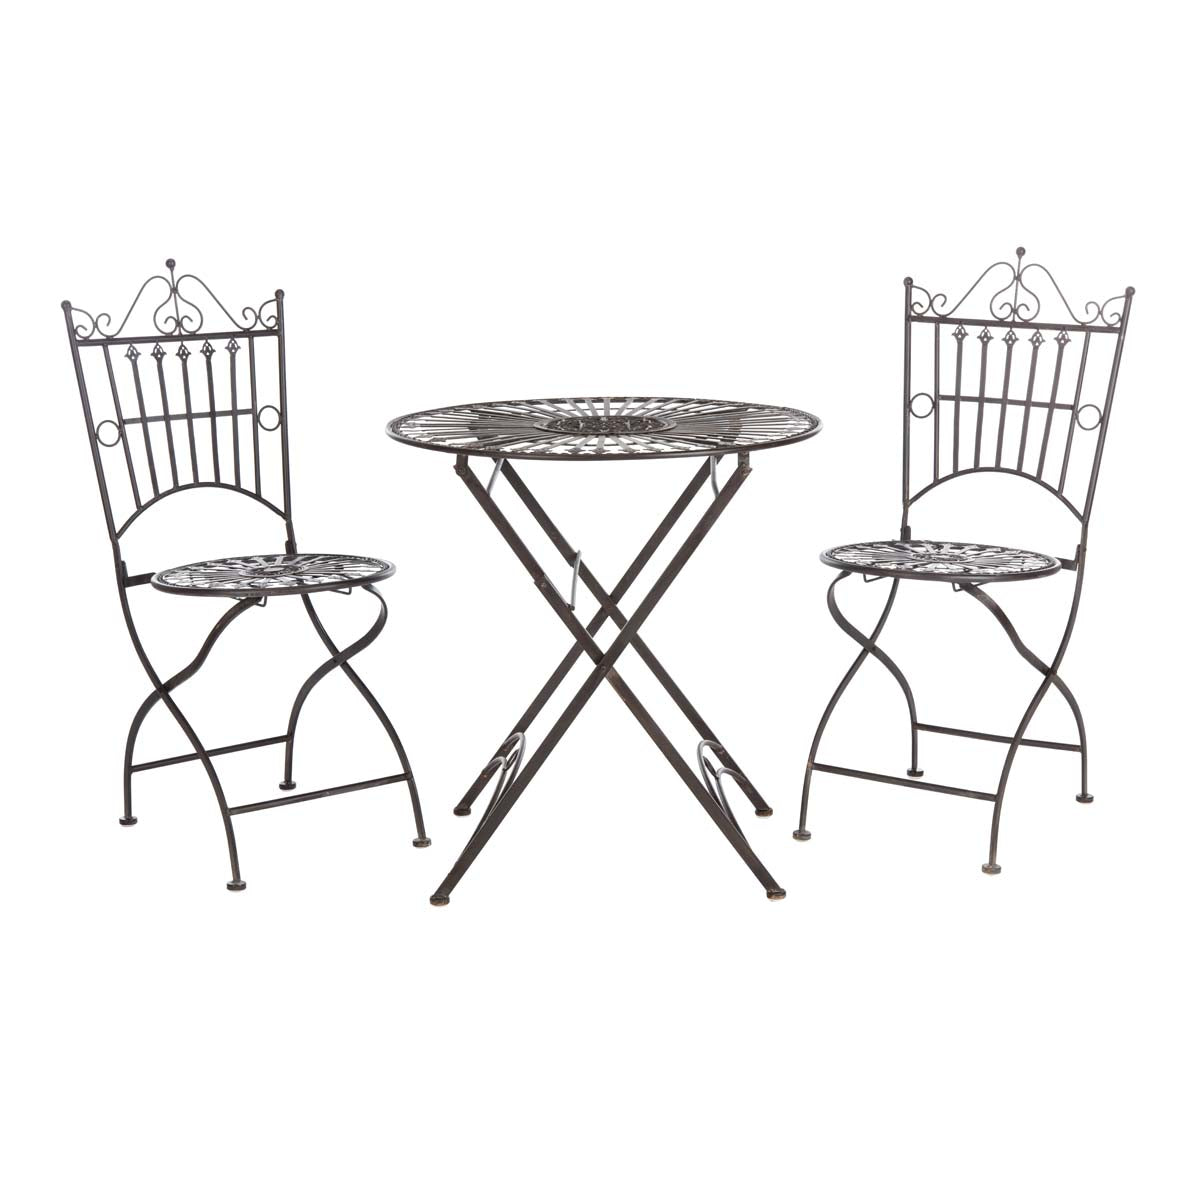 Safavieh Belen Bistro Set, One Table And Two Chairs , PAT5020 - Black Rust